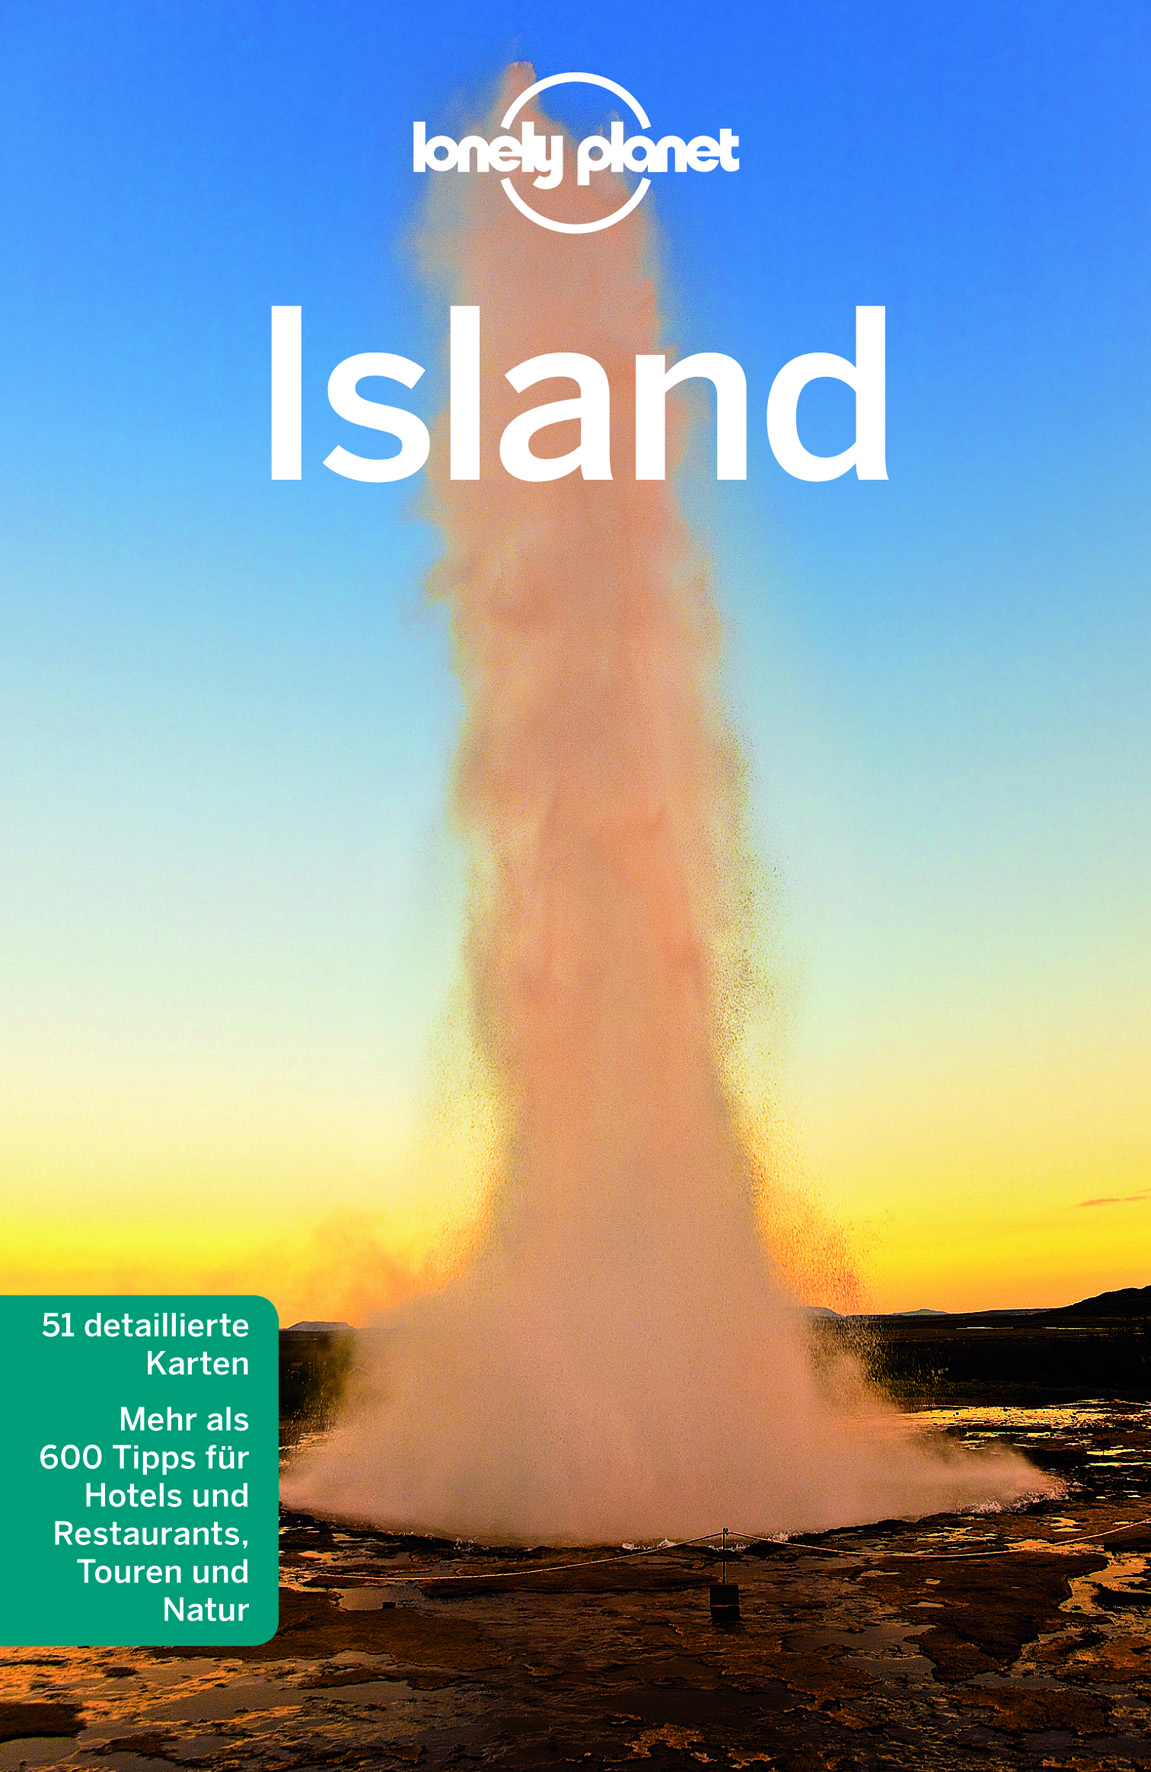 lonely planet Island